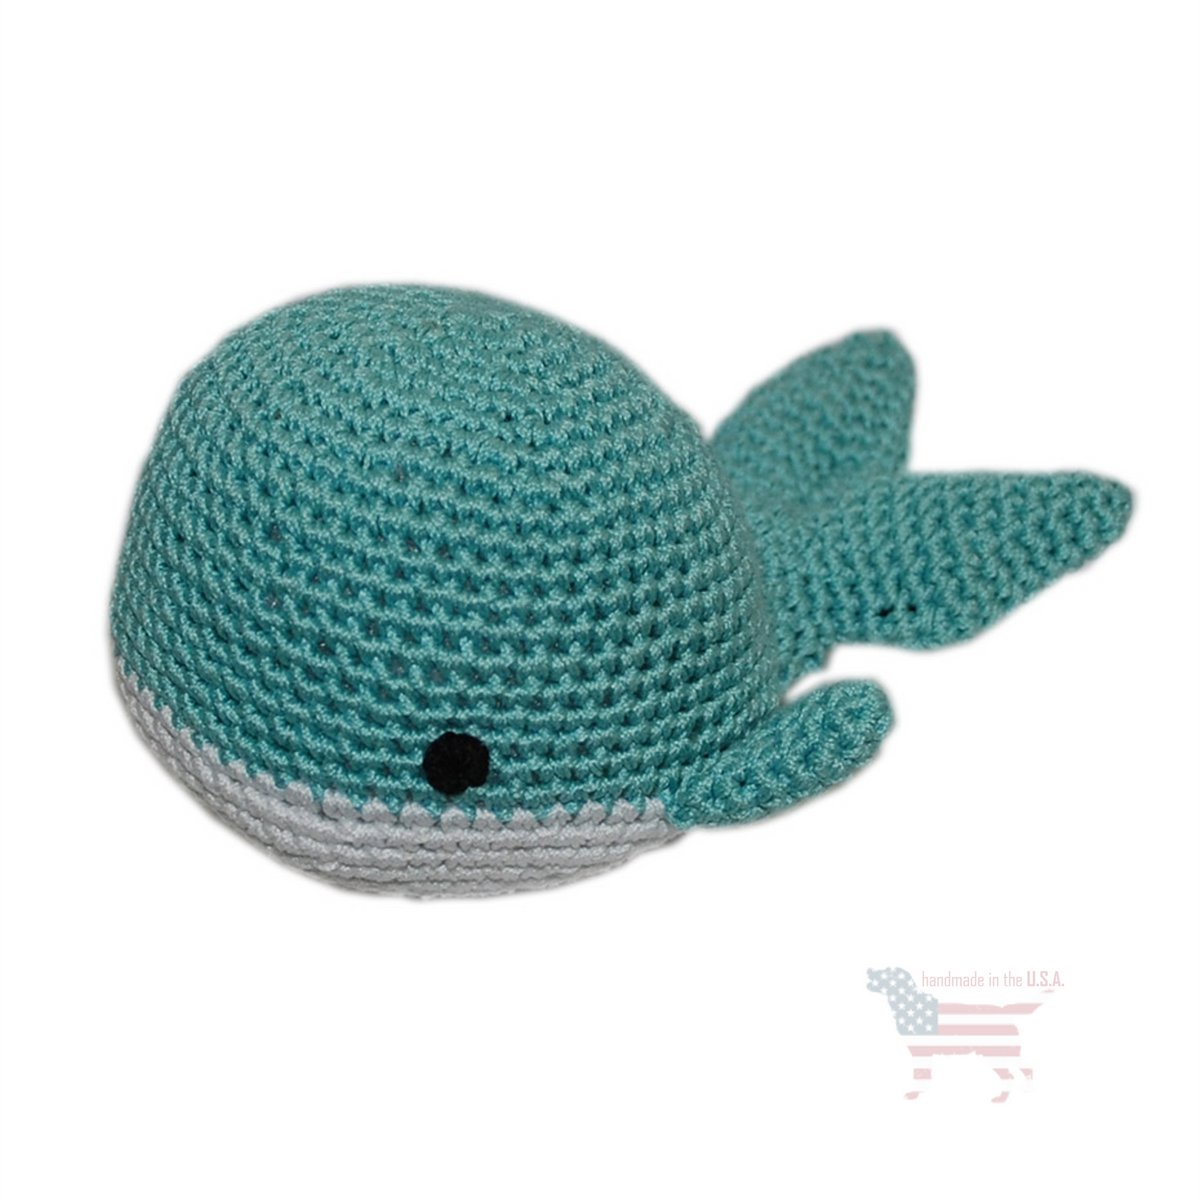 Wally the Whale Handmade Knit Knack Toys - 3 Red Rovers